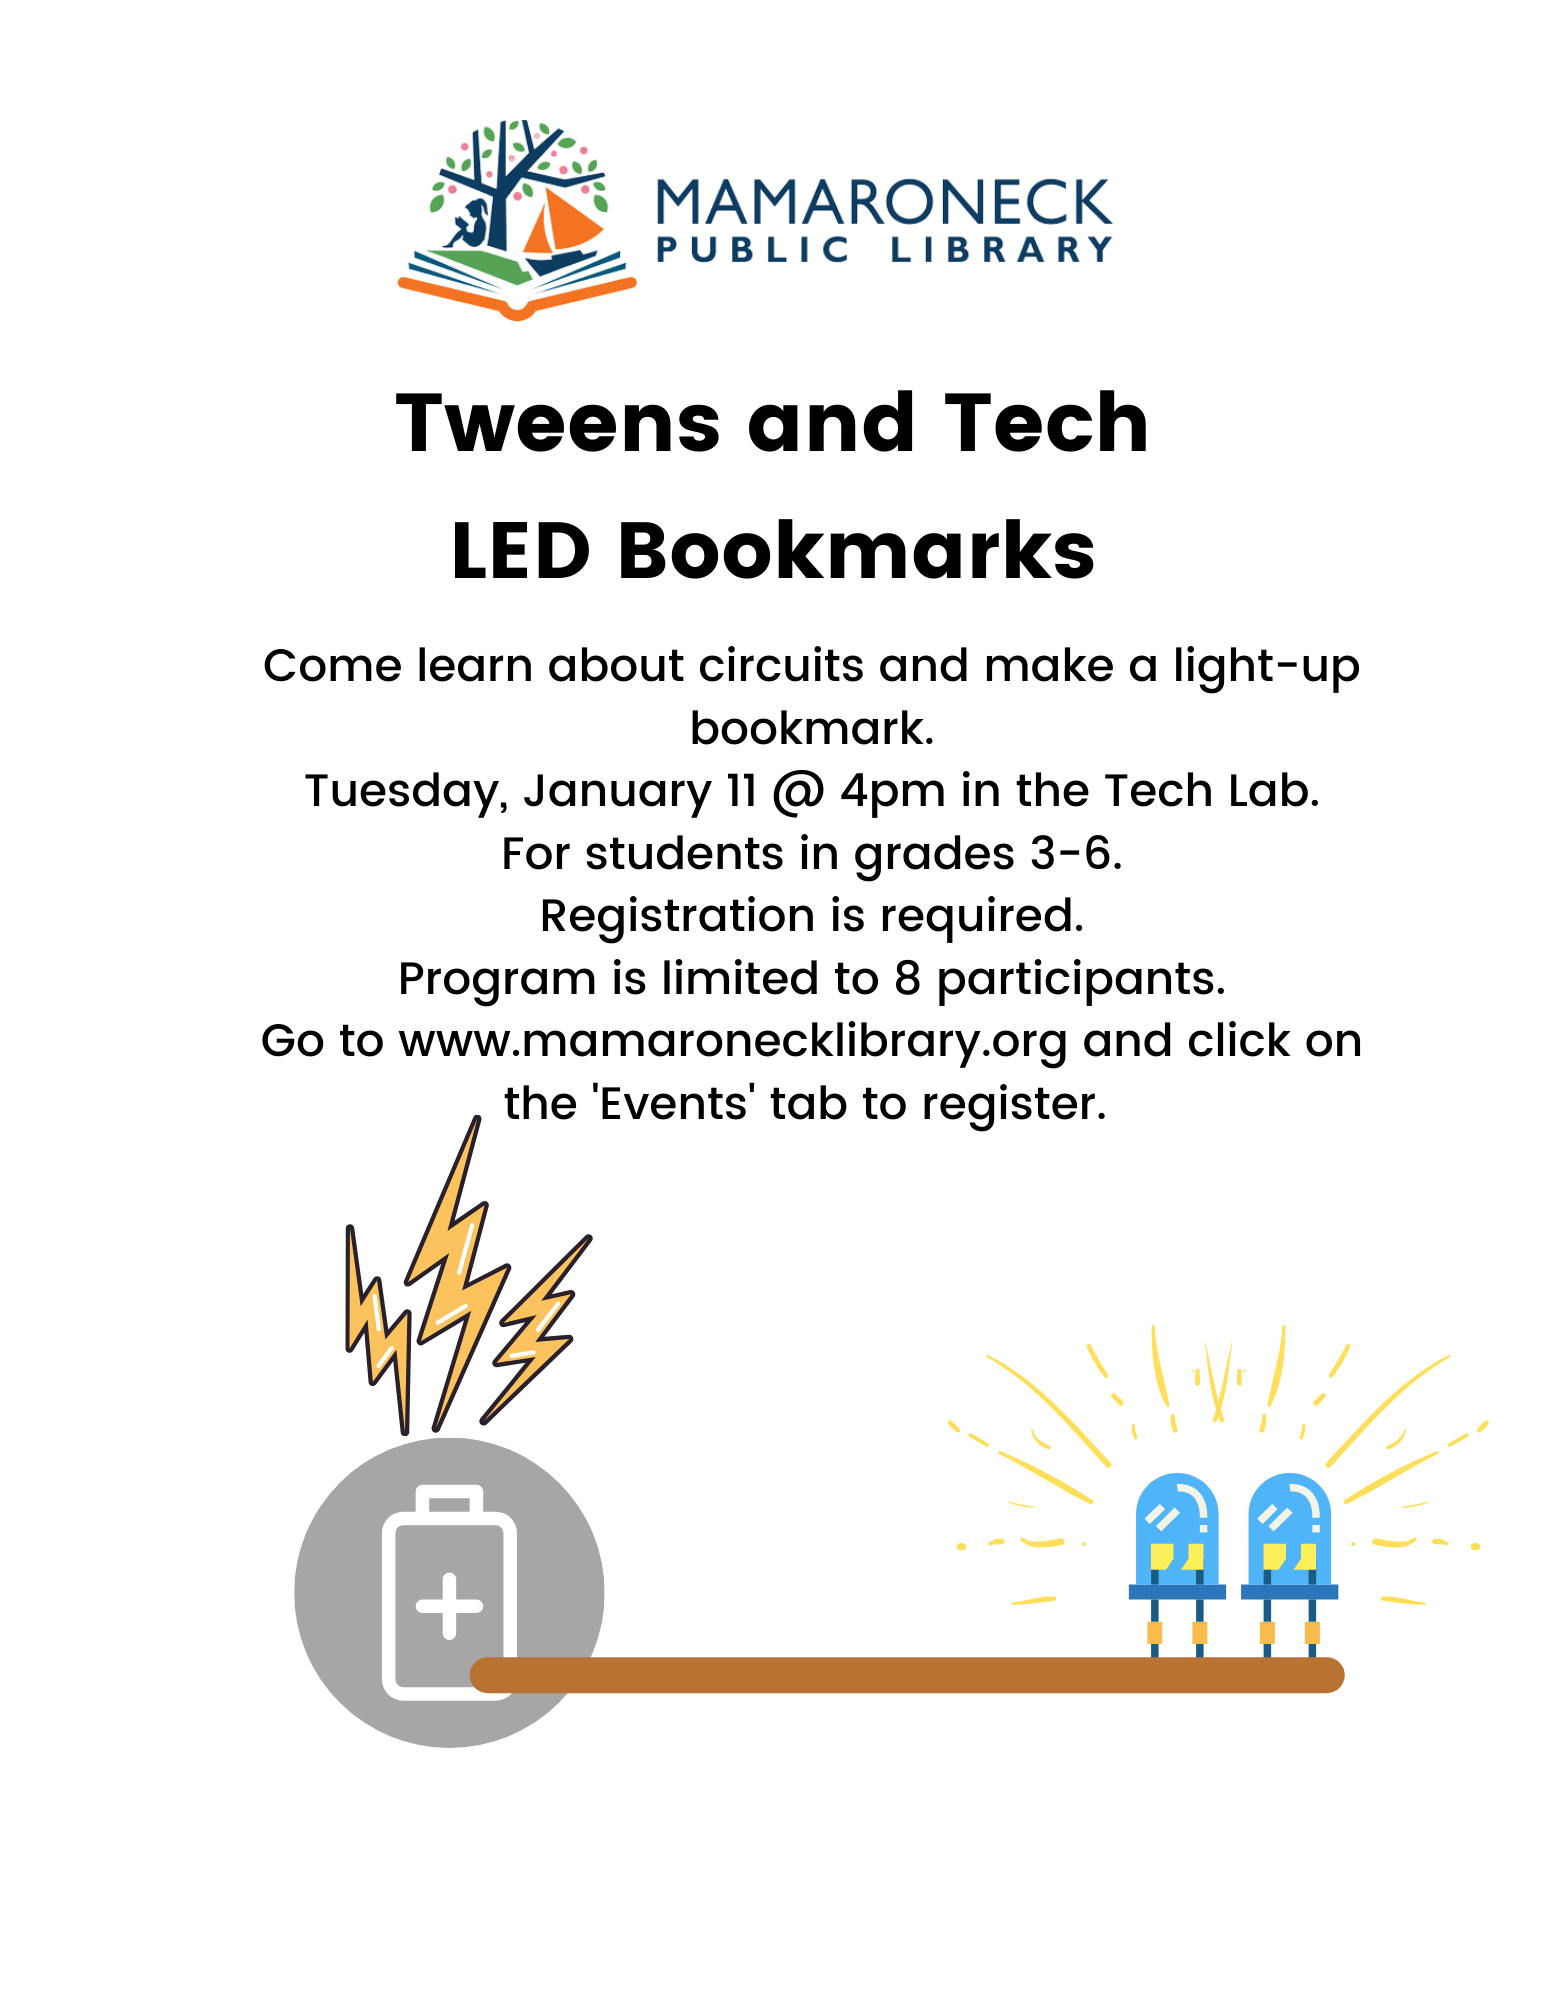 Tweens and Tech LED bookmarks program in January 2022